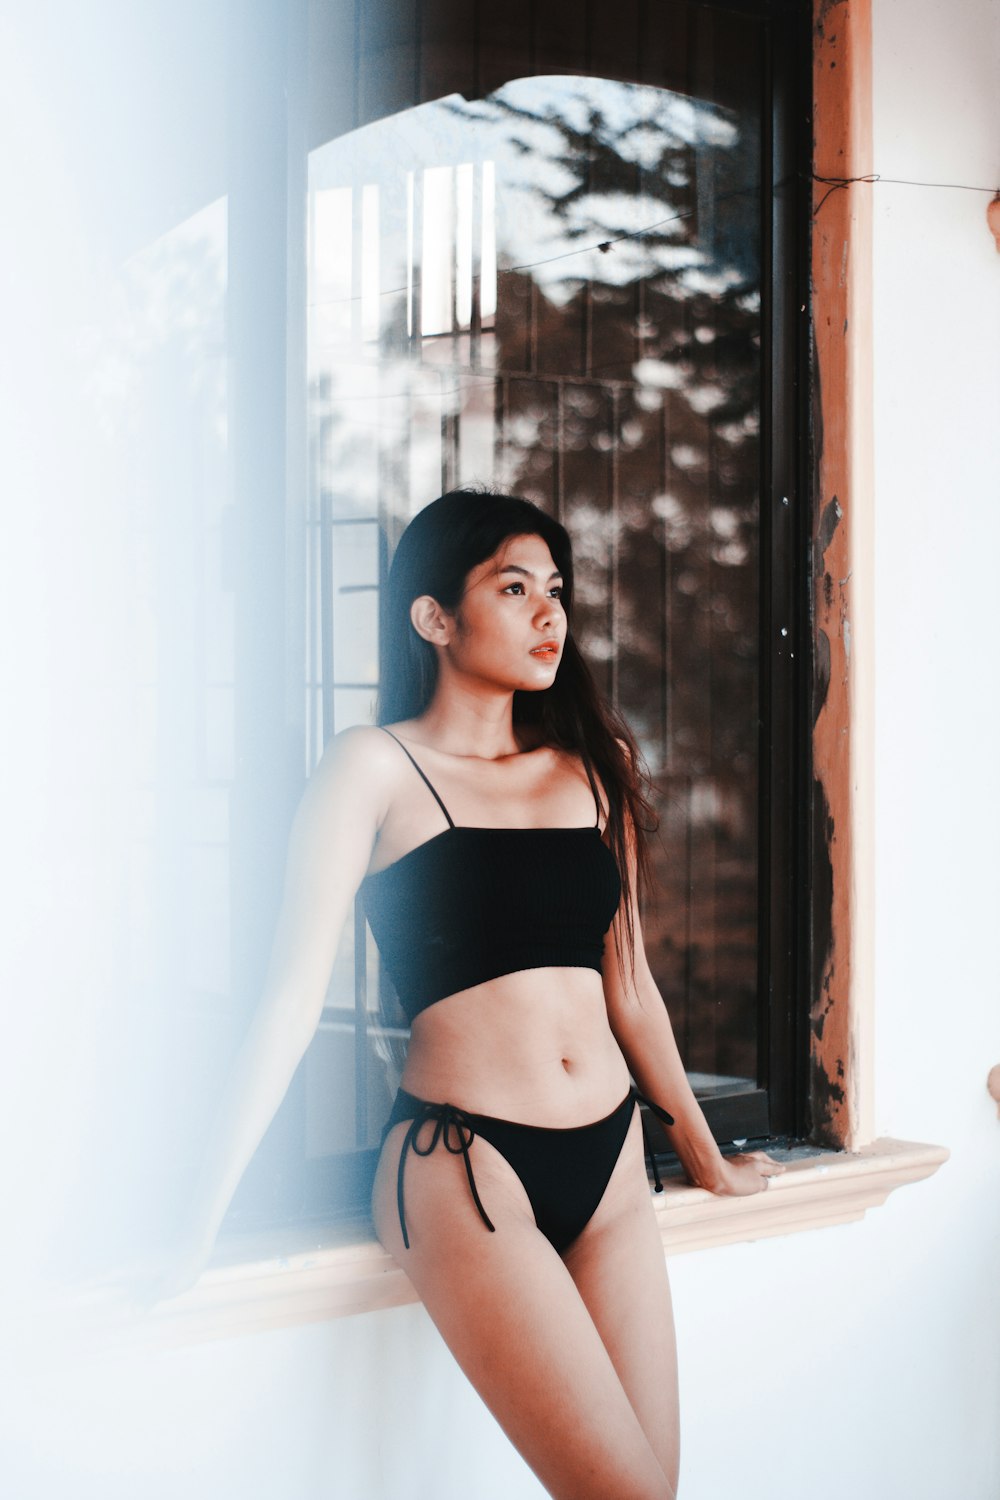 Underclothing Pictures  Download Free Images on Unsplash